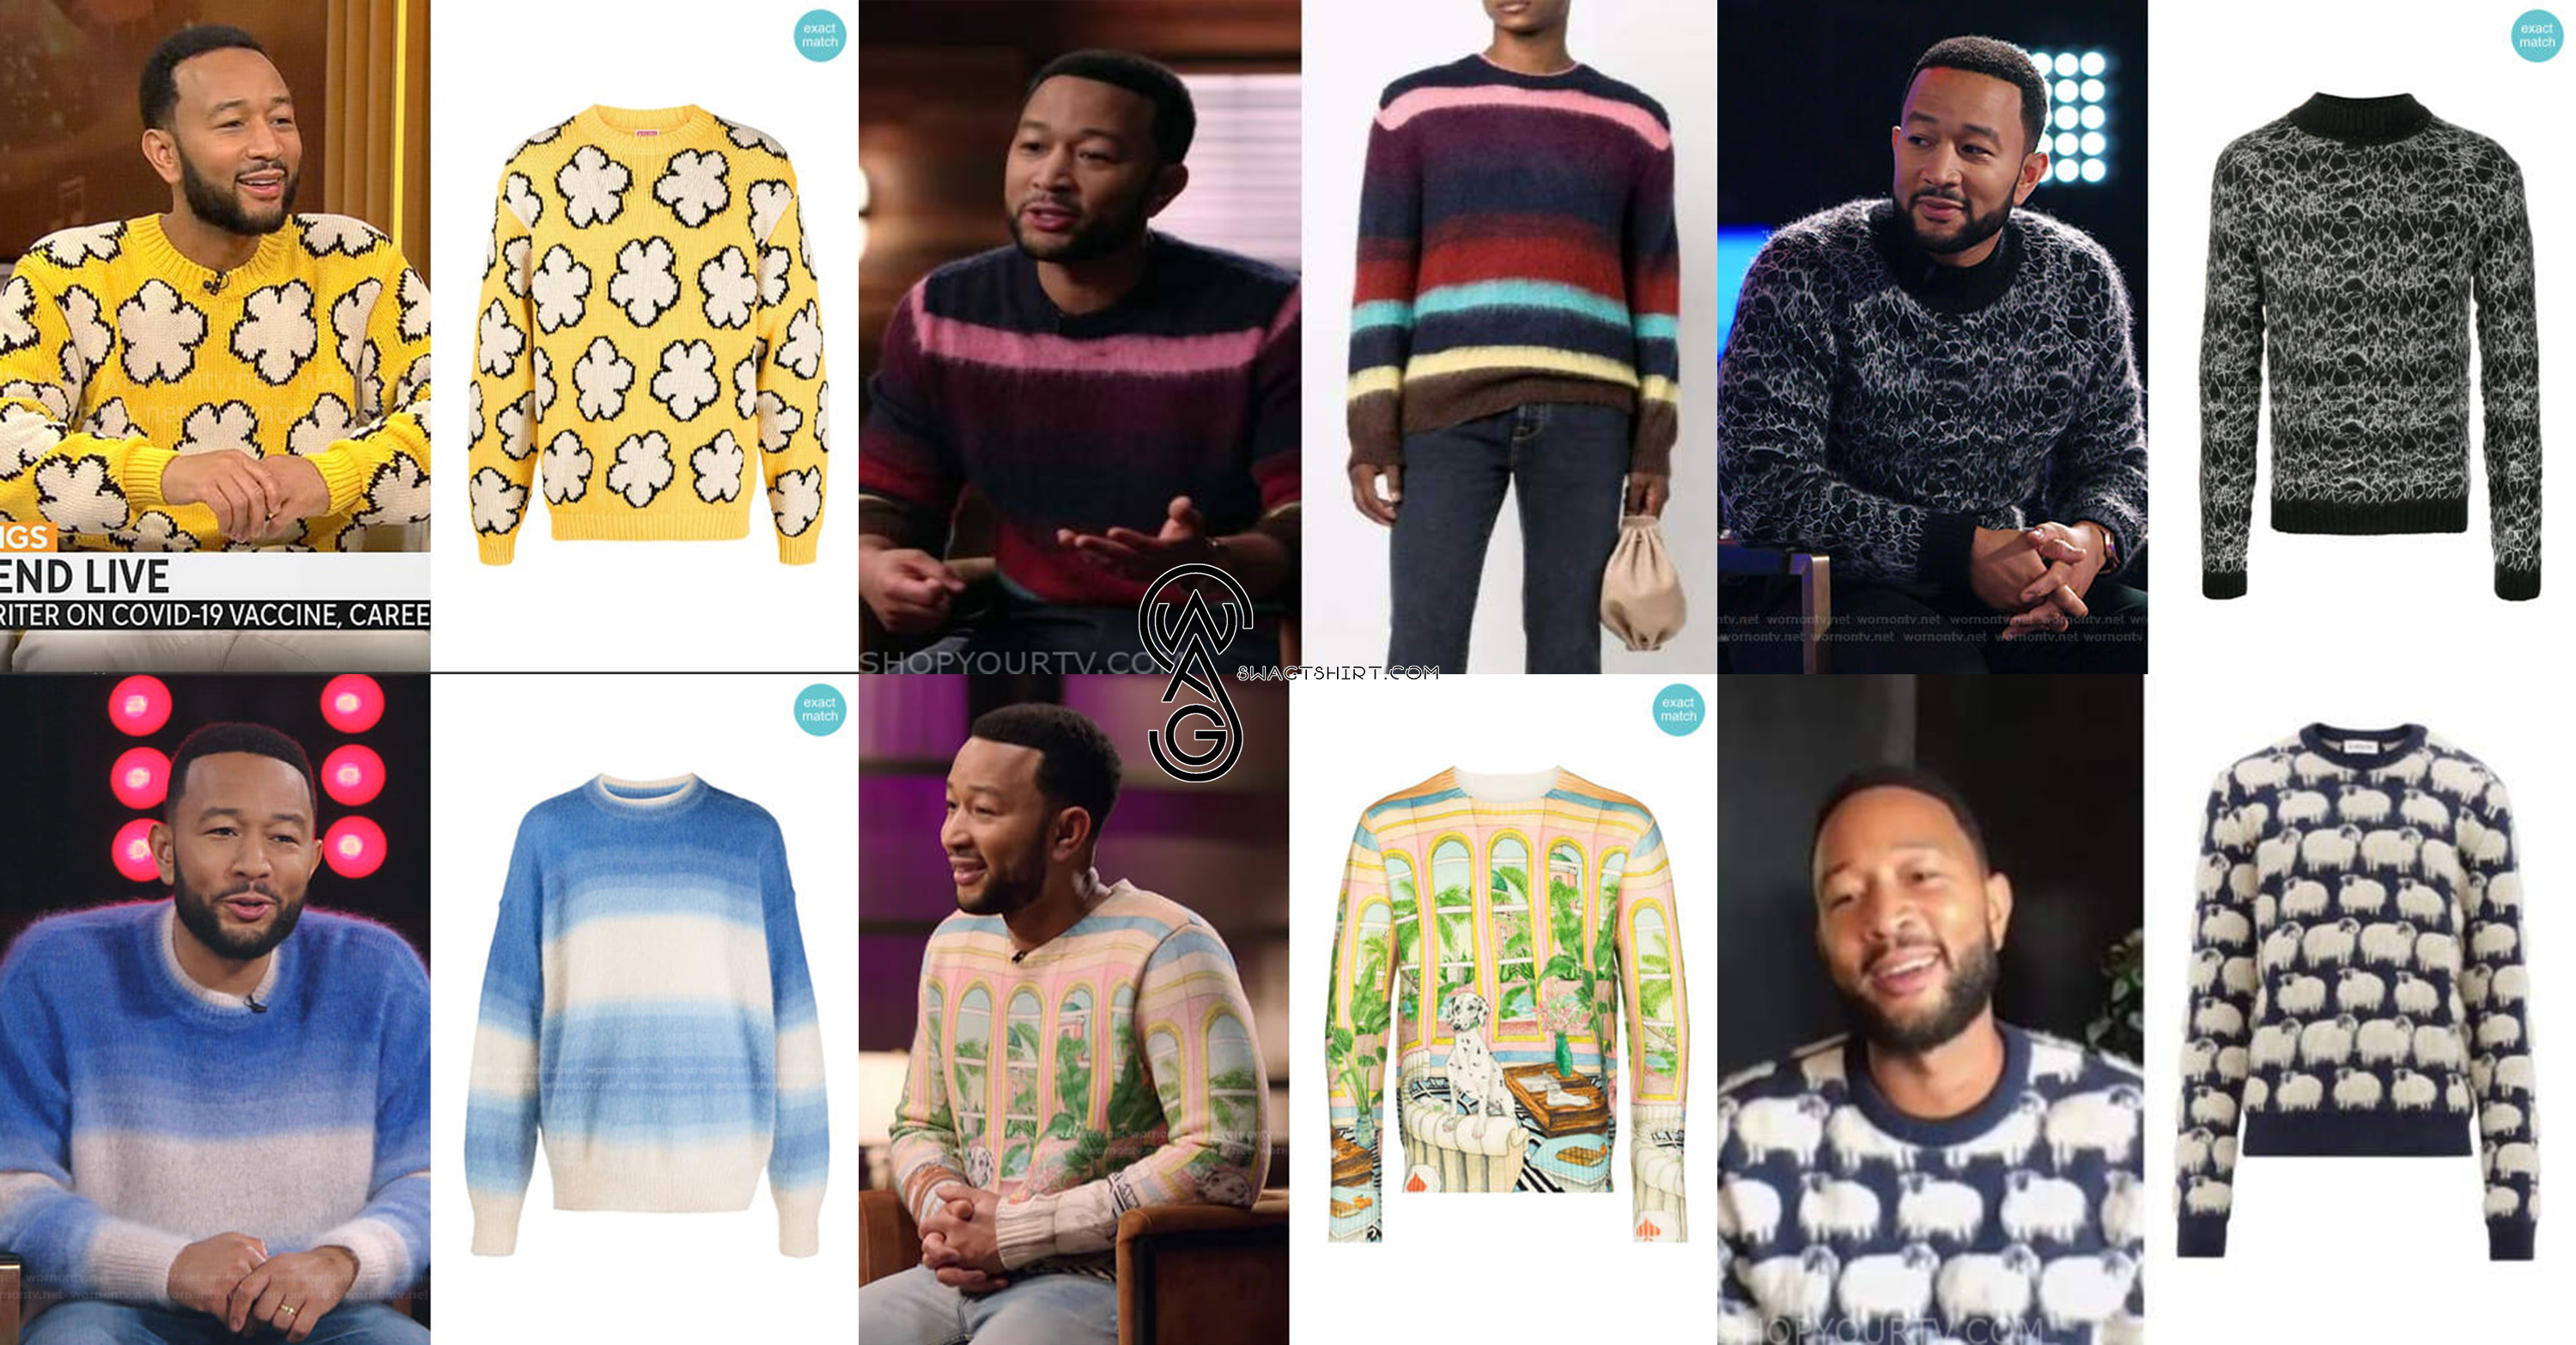 John Legend: The Maestro of Melodies and Sweaters on 'The Voice